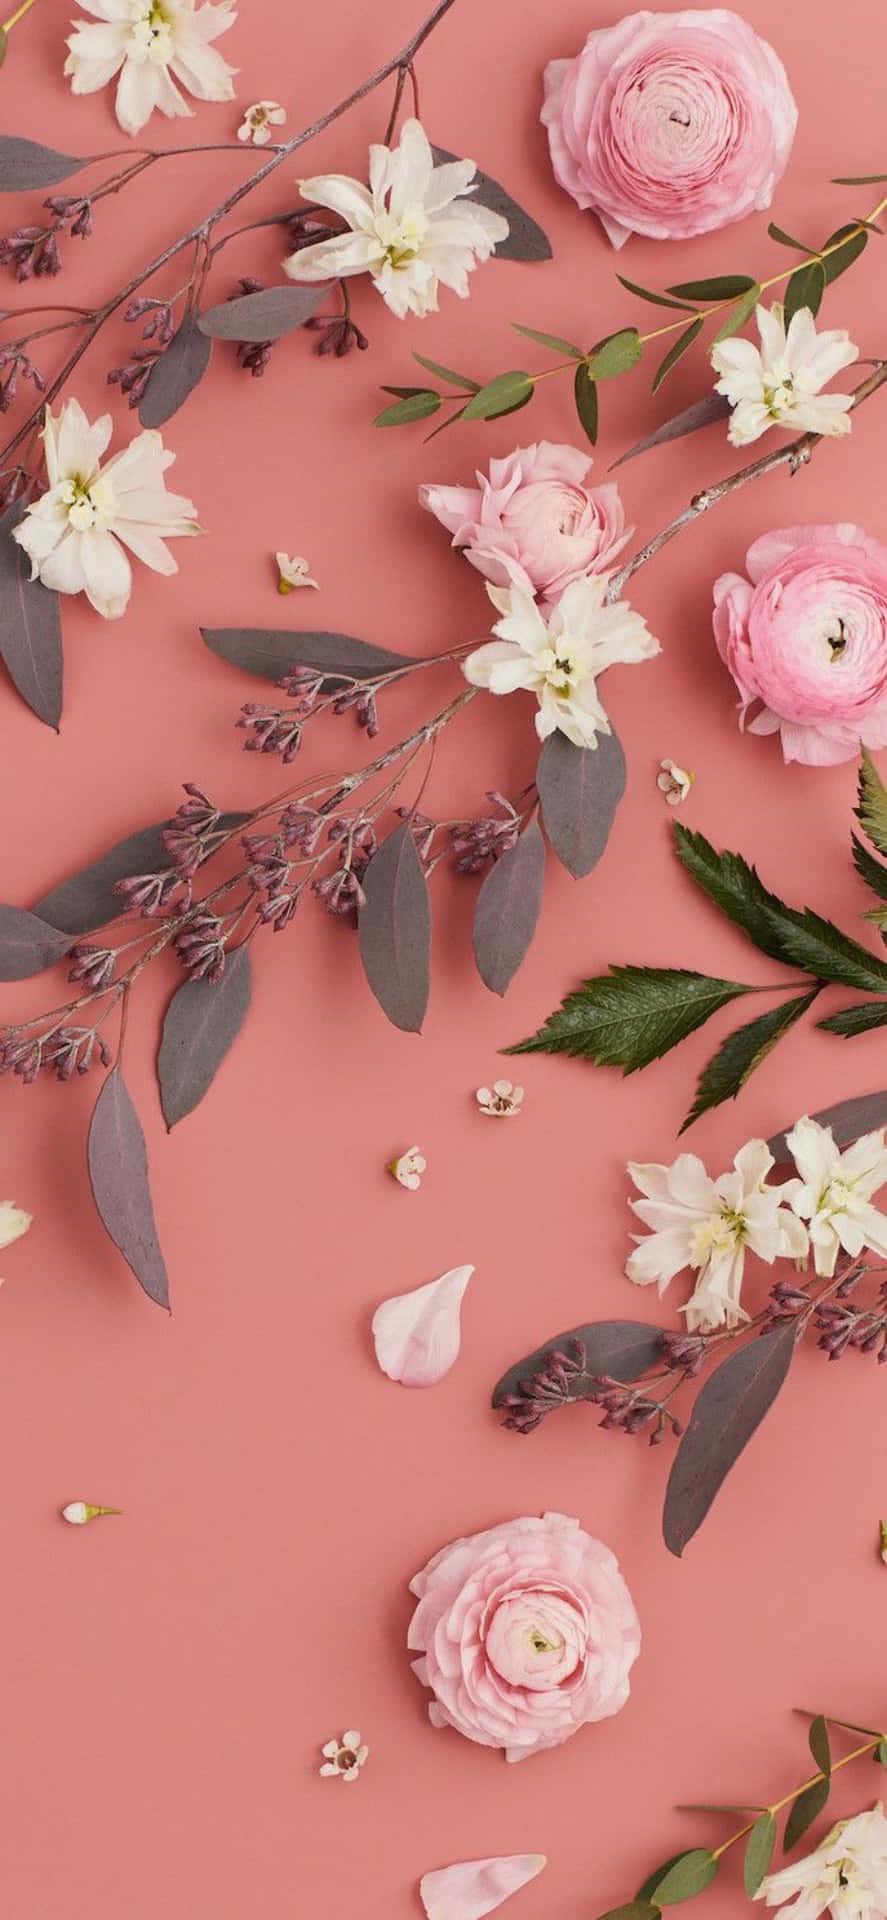 Feeling tranquil in a pink and white paradise Wallpaper